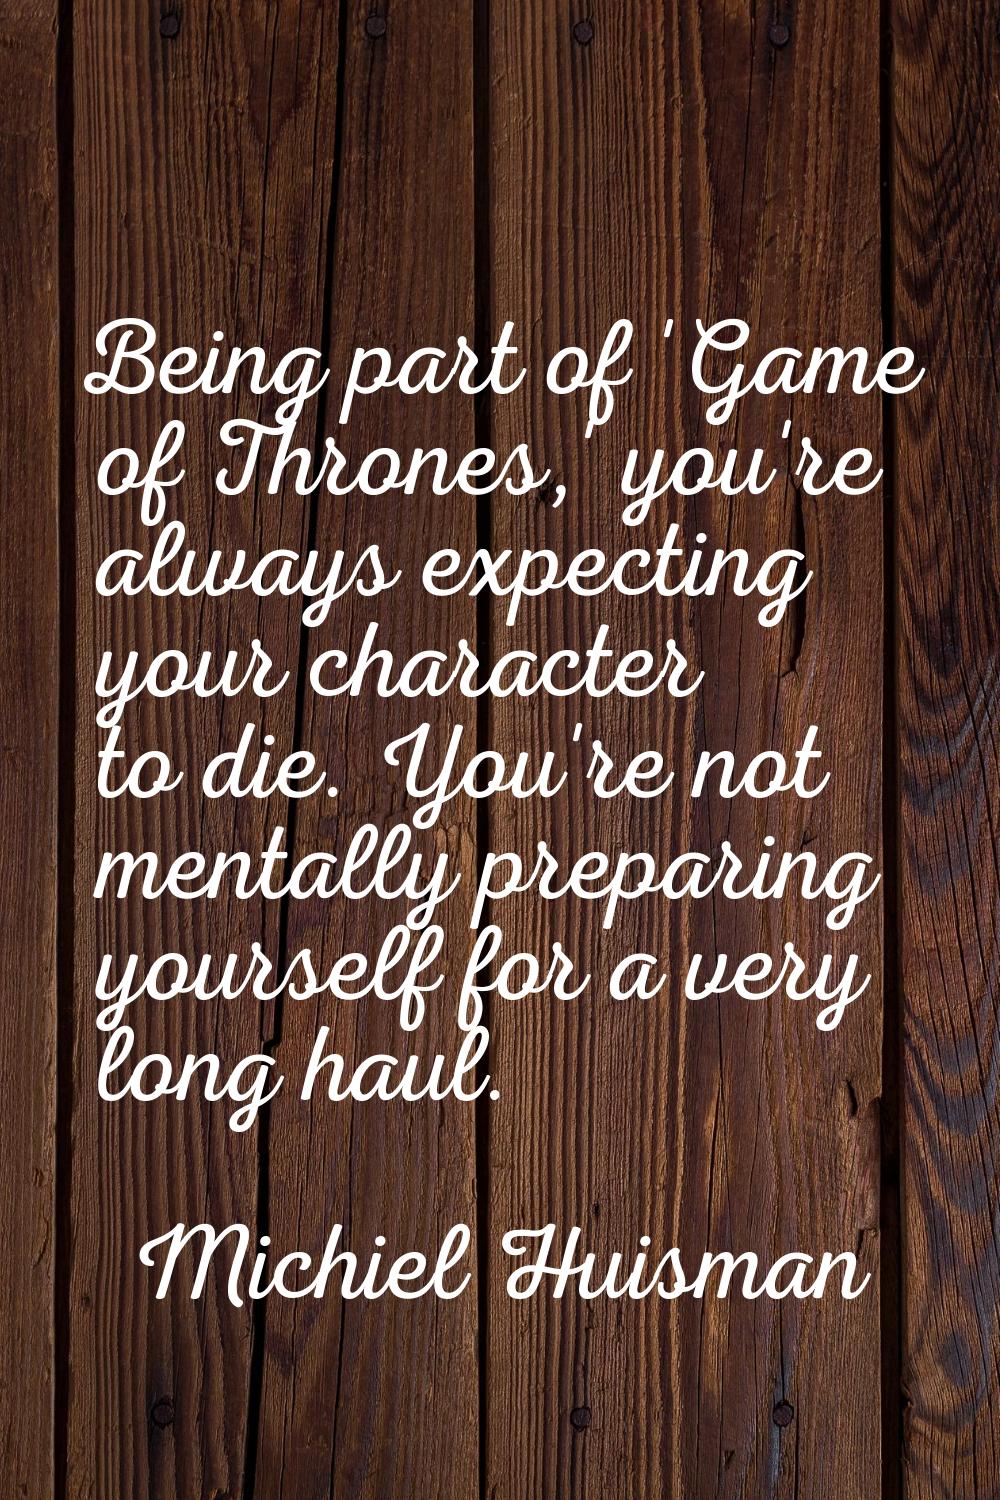 Being part of 'Game of Thrones,' you're always expecting your character to die. You're not mentally